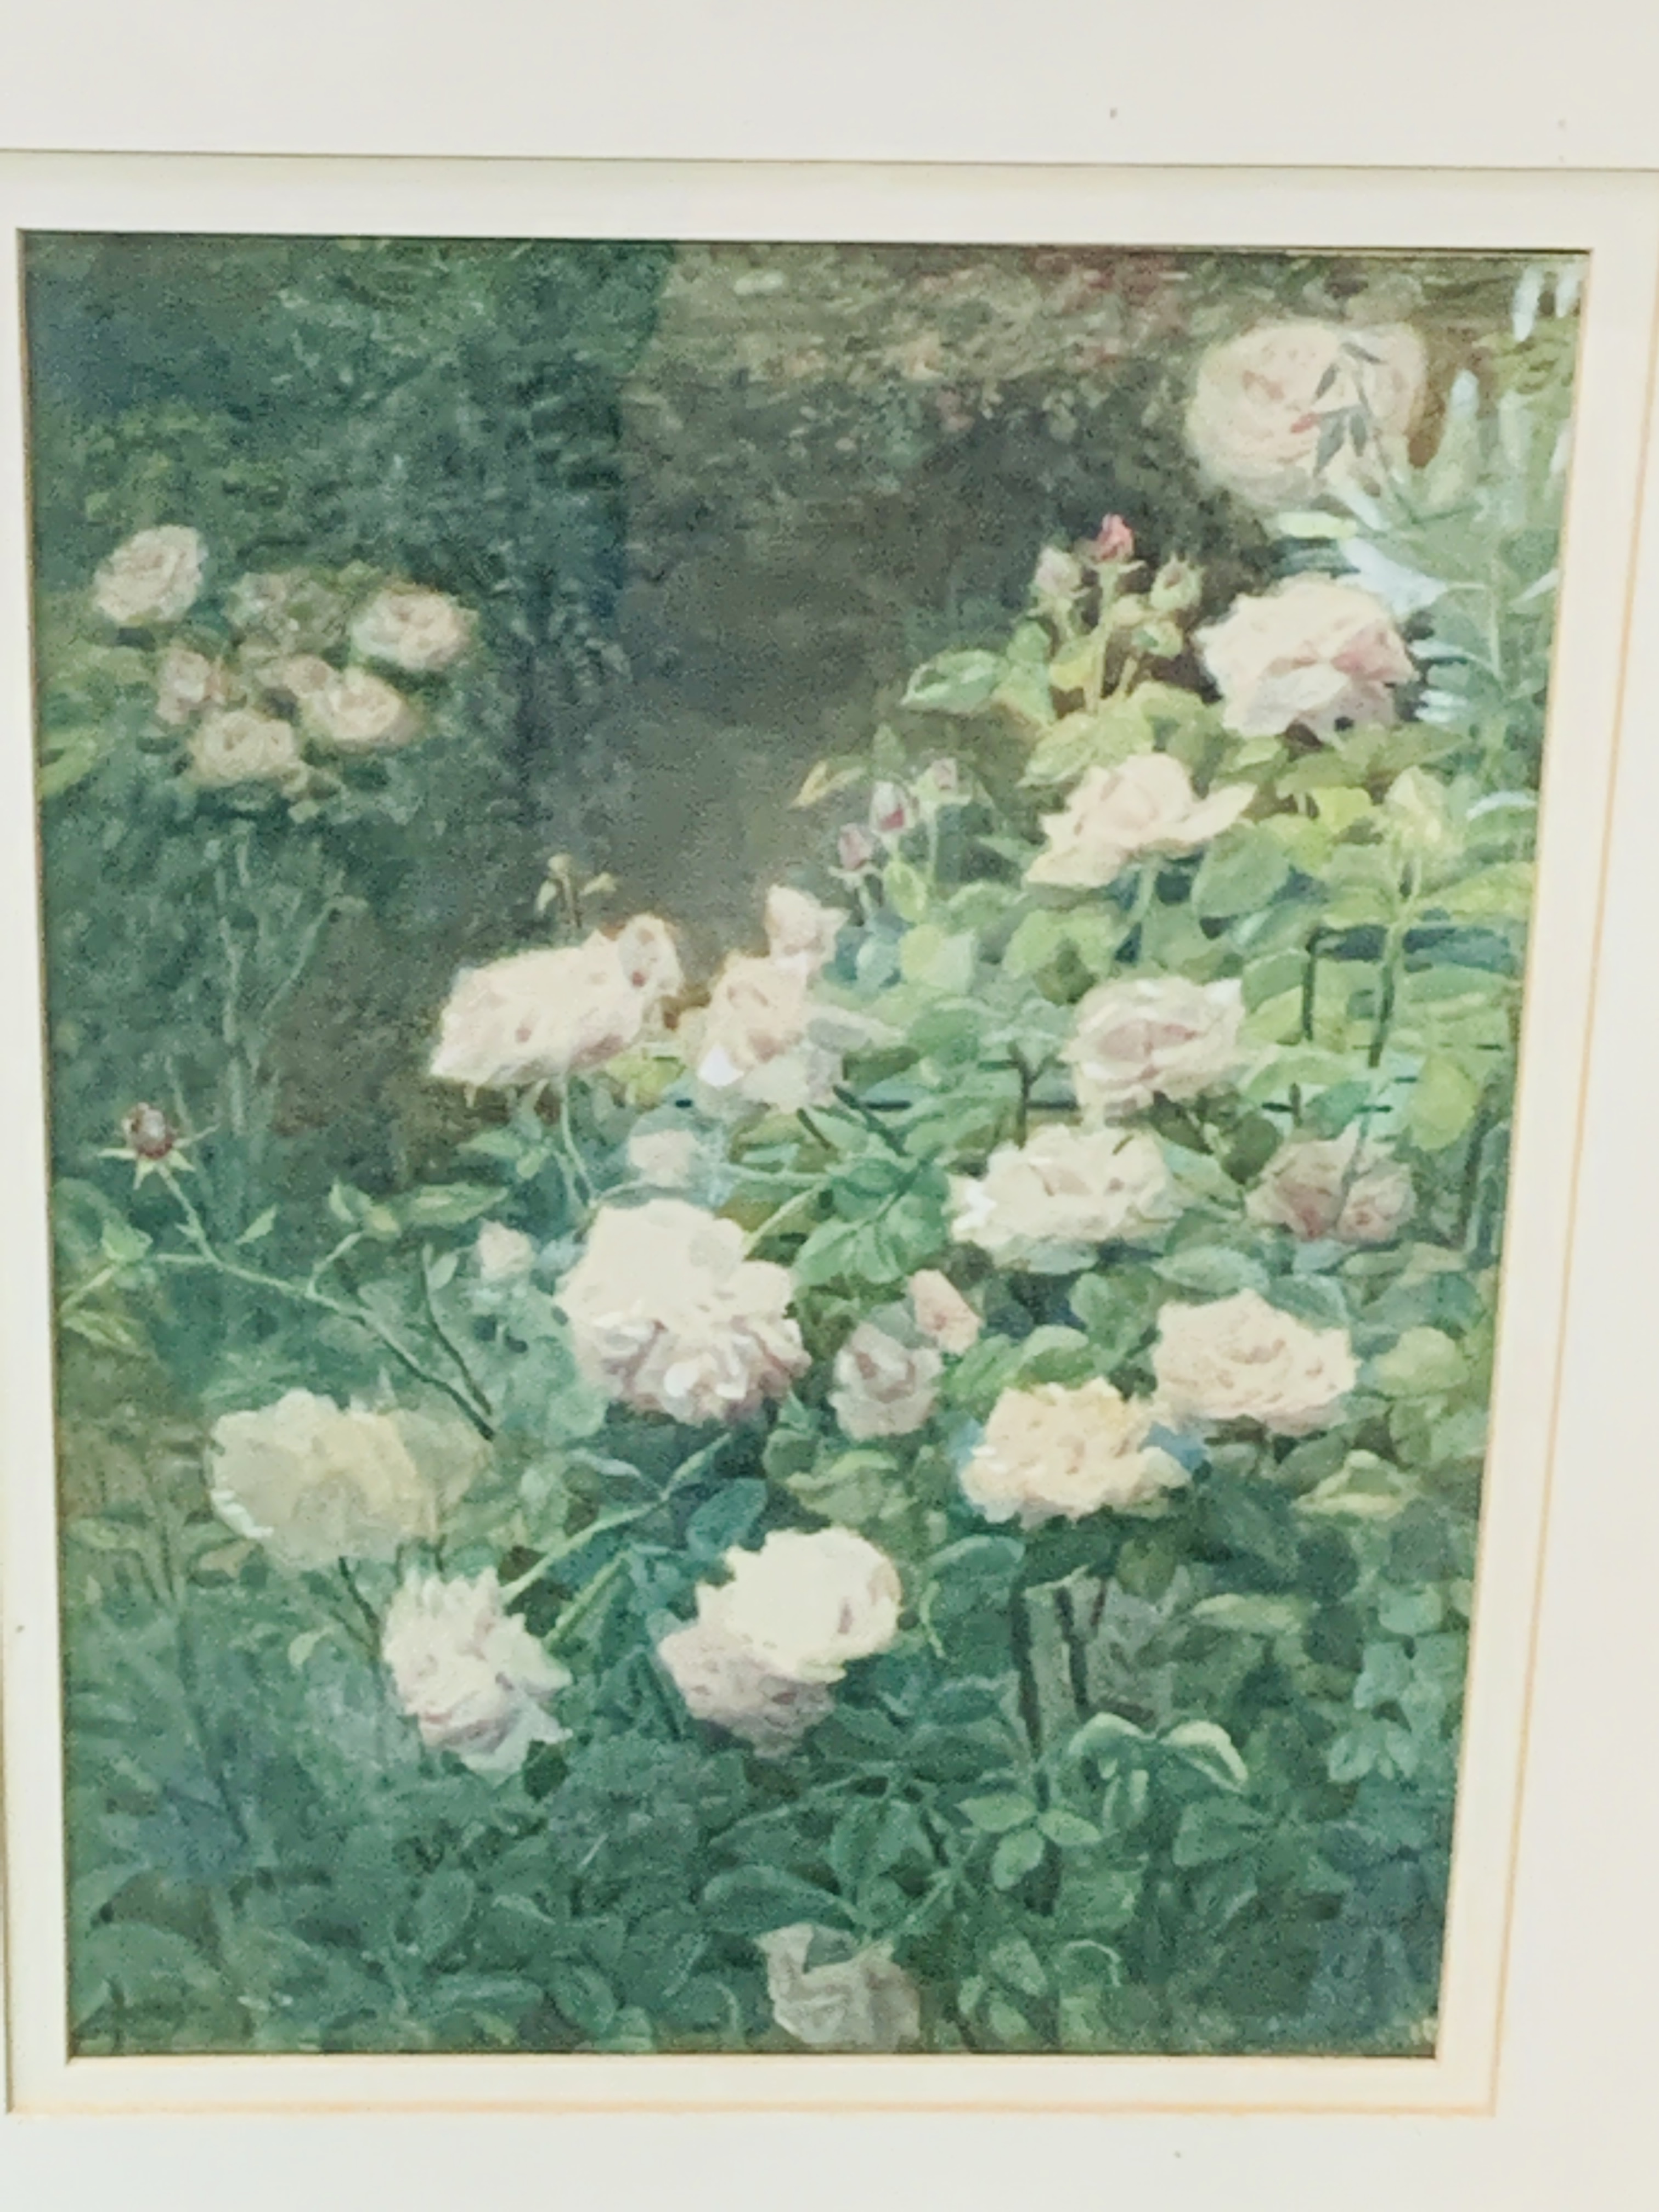 Framed and glazed watercolour by Edith A Stott RA 1903; together with another watercolour